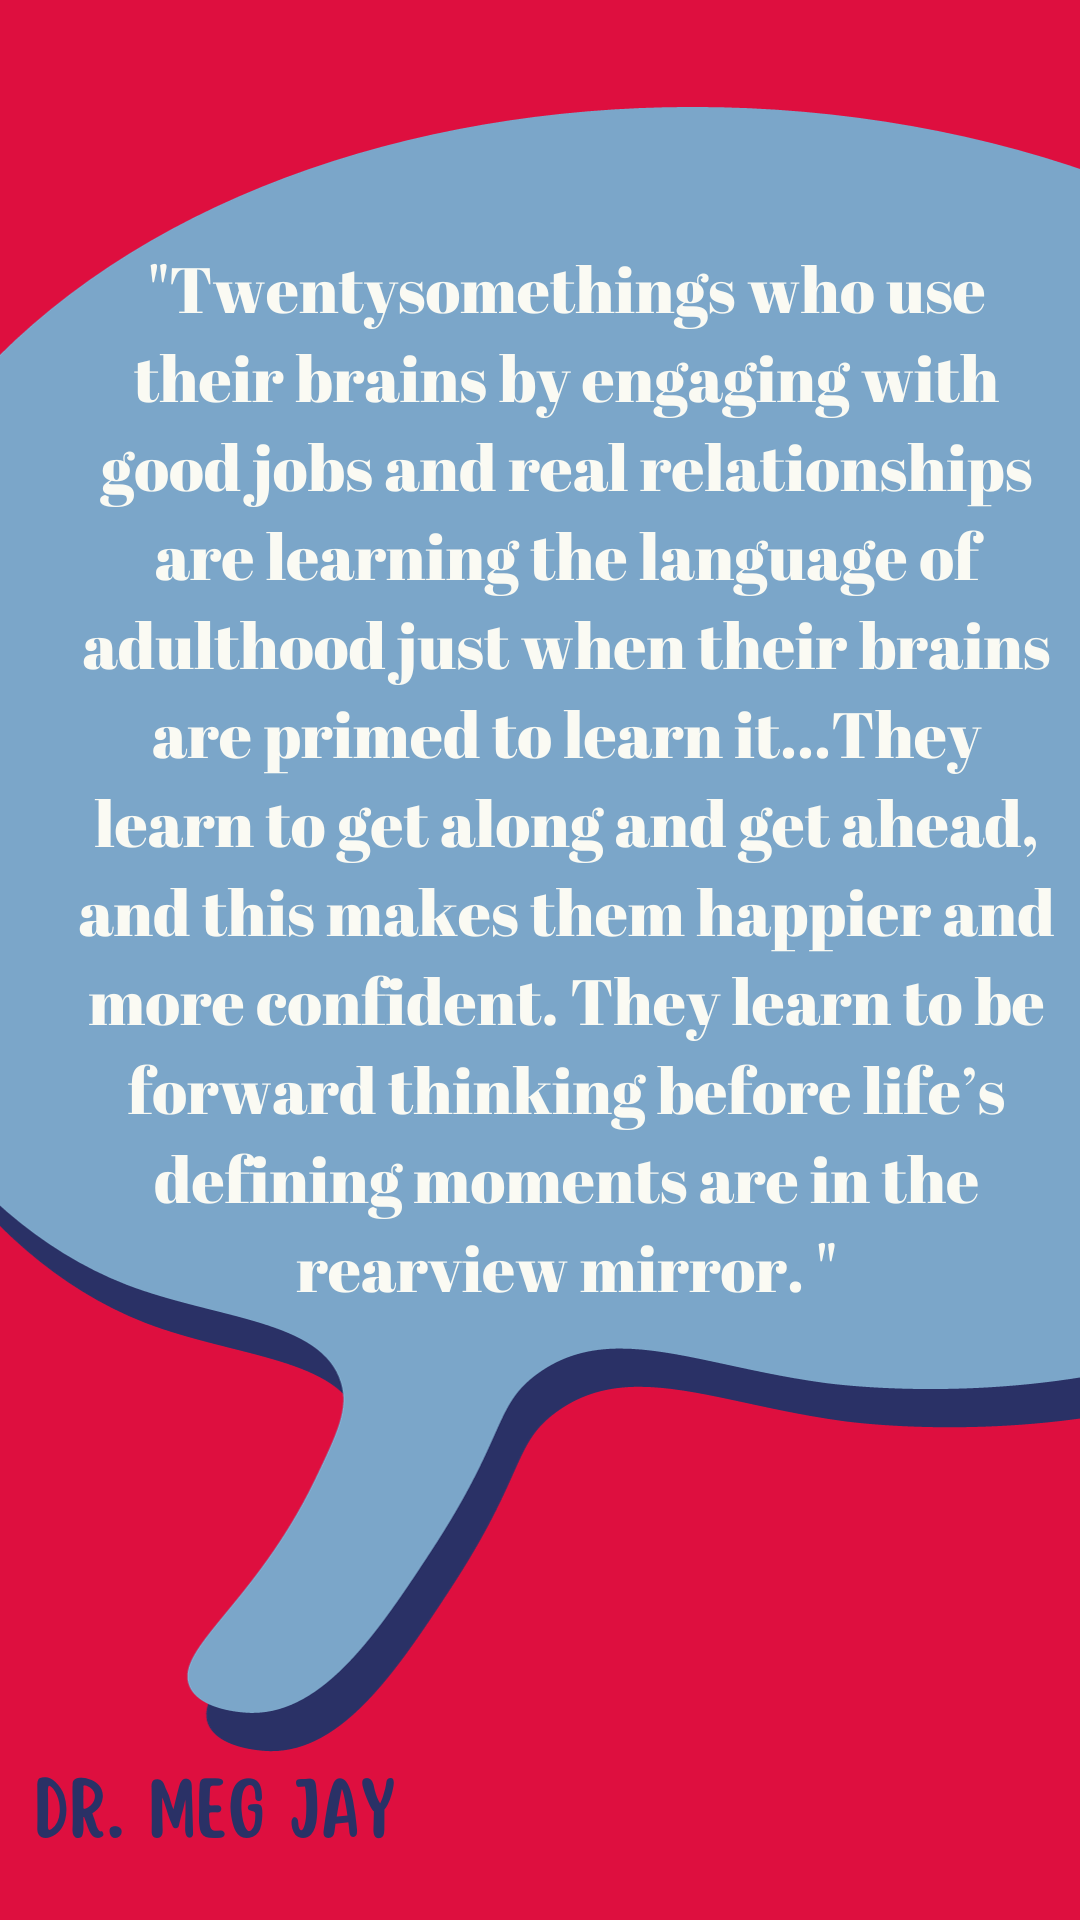 Twentysomethings who use their brains by engaging with good jobs and real relationships are learning the language of adulthood just when their brains are primed to learn it...They learn to get along and get ahead, and this makes them happier and more confident. They learn to be forward thinking before life’s defining moments are in the rearview mirror," said Dr. Meg Jay.